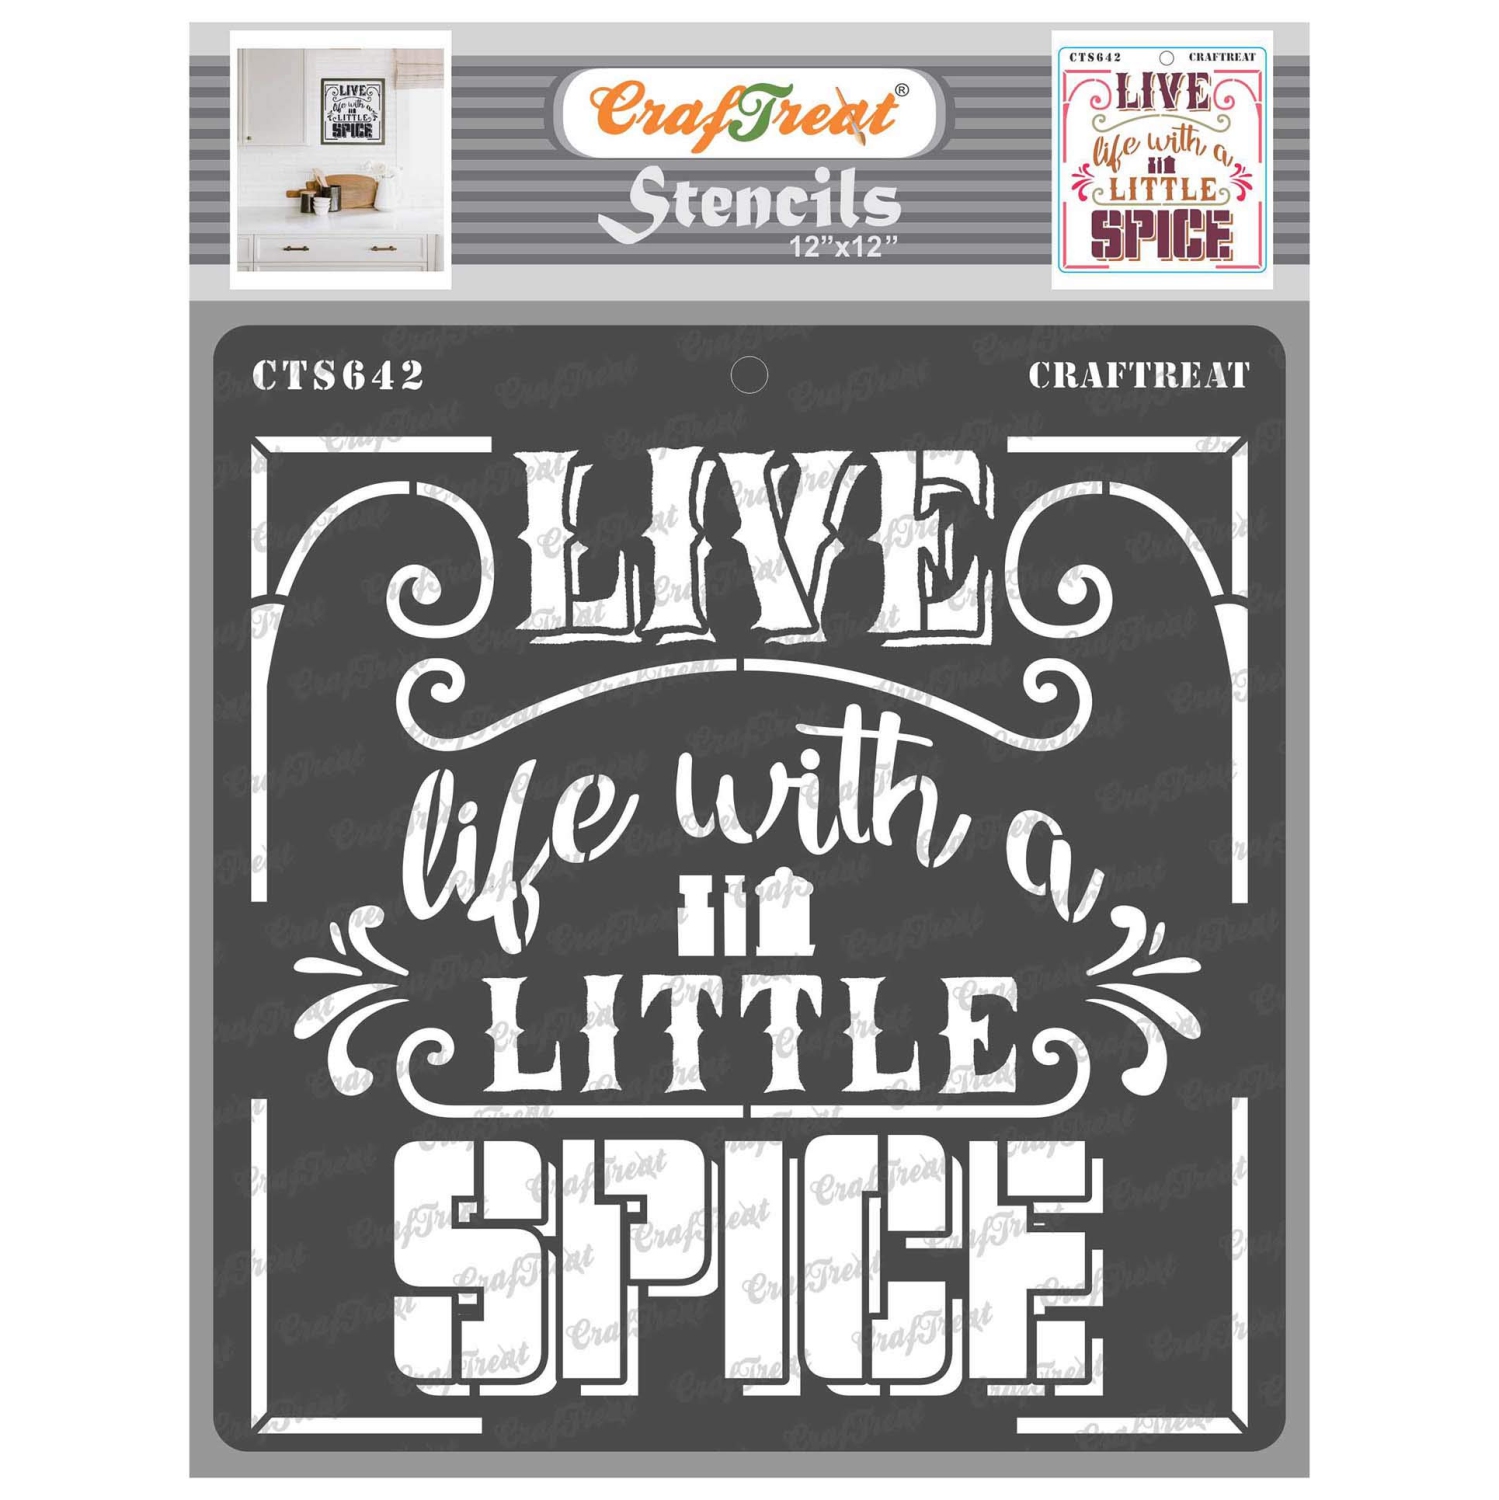 Spice up your Home with Spicy Life Kitchen Art Stencils - DIY Home Decor Stencils for Painting on Wood, 12X12 inches, featuring Inspiring Quotes